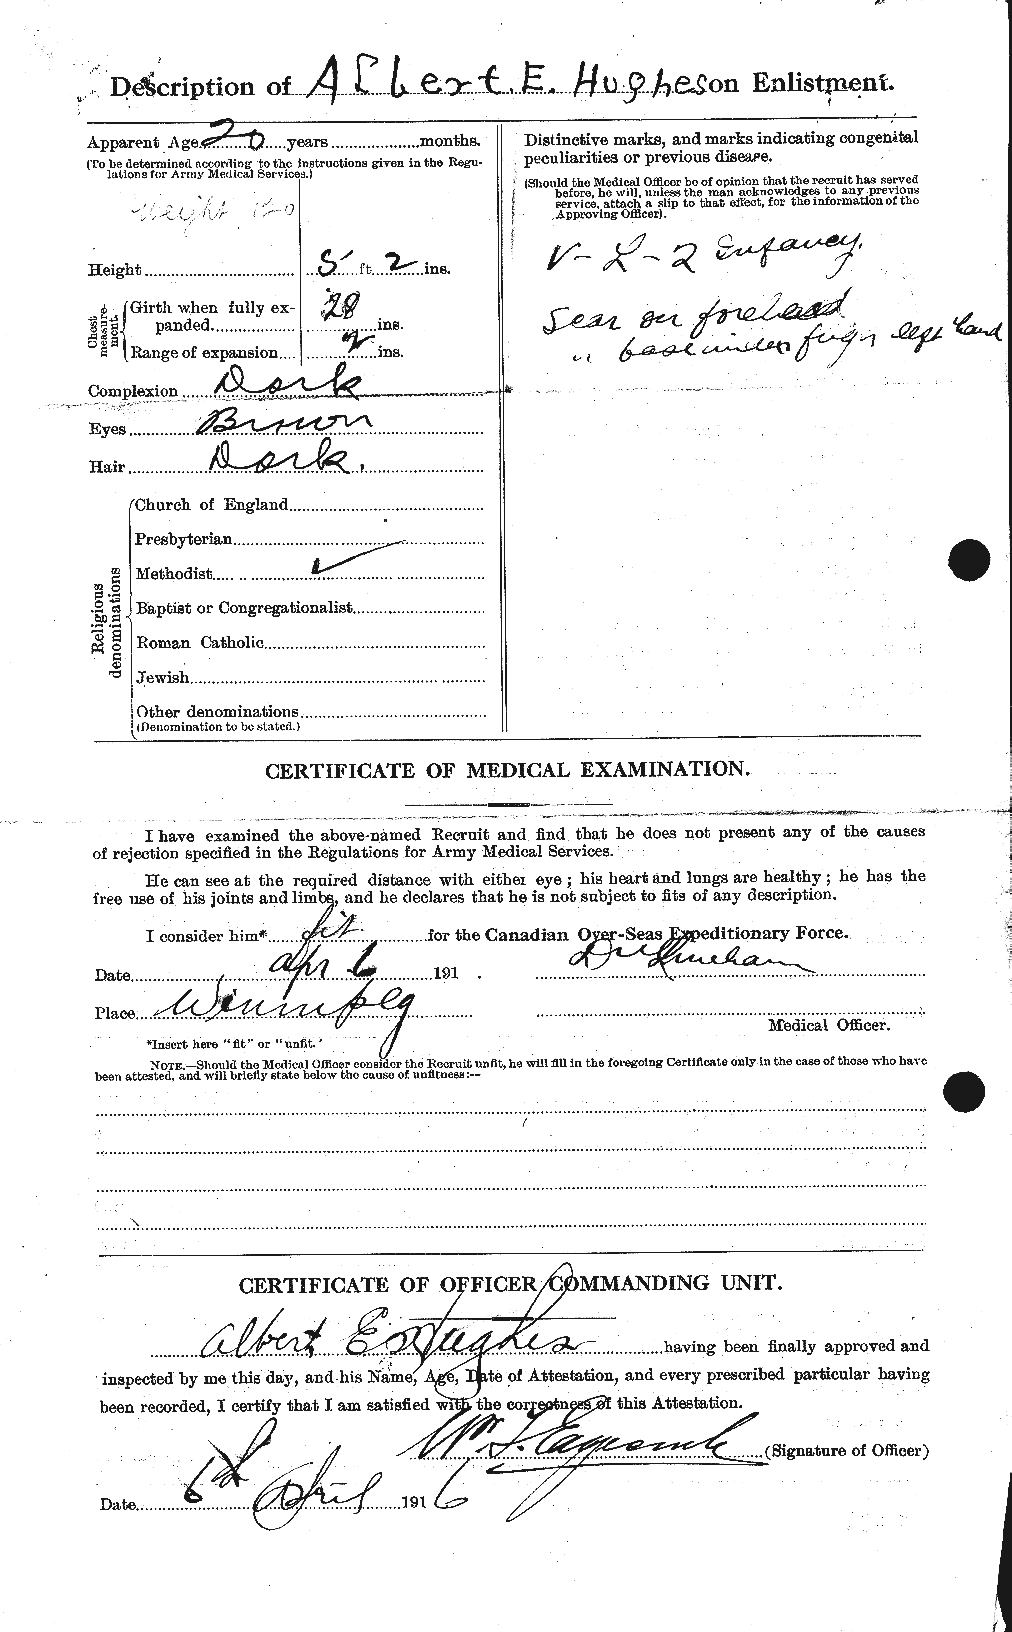 Personnel Records of the First World War - CEF 402520b